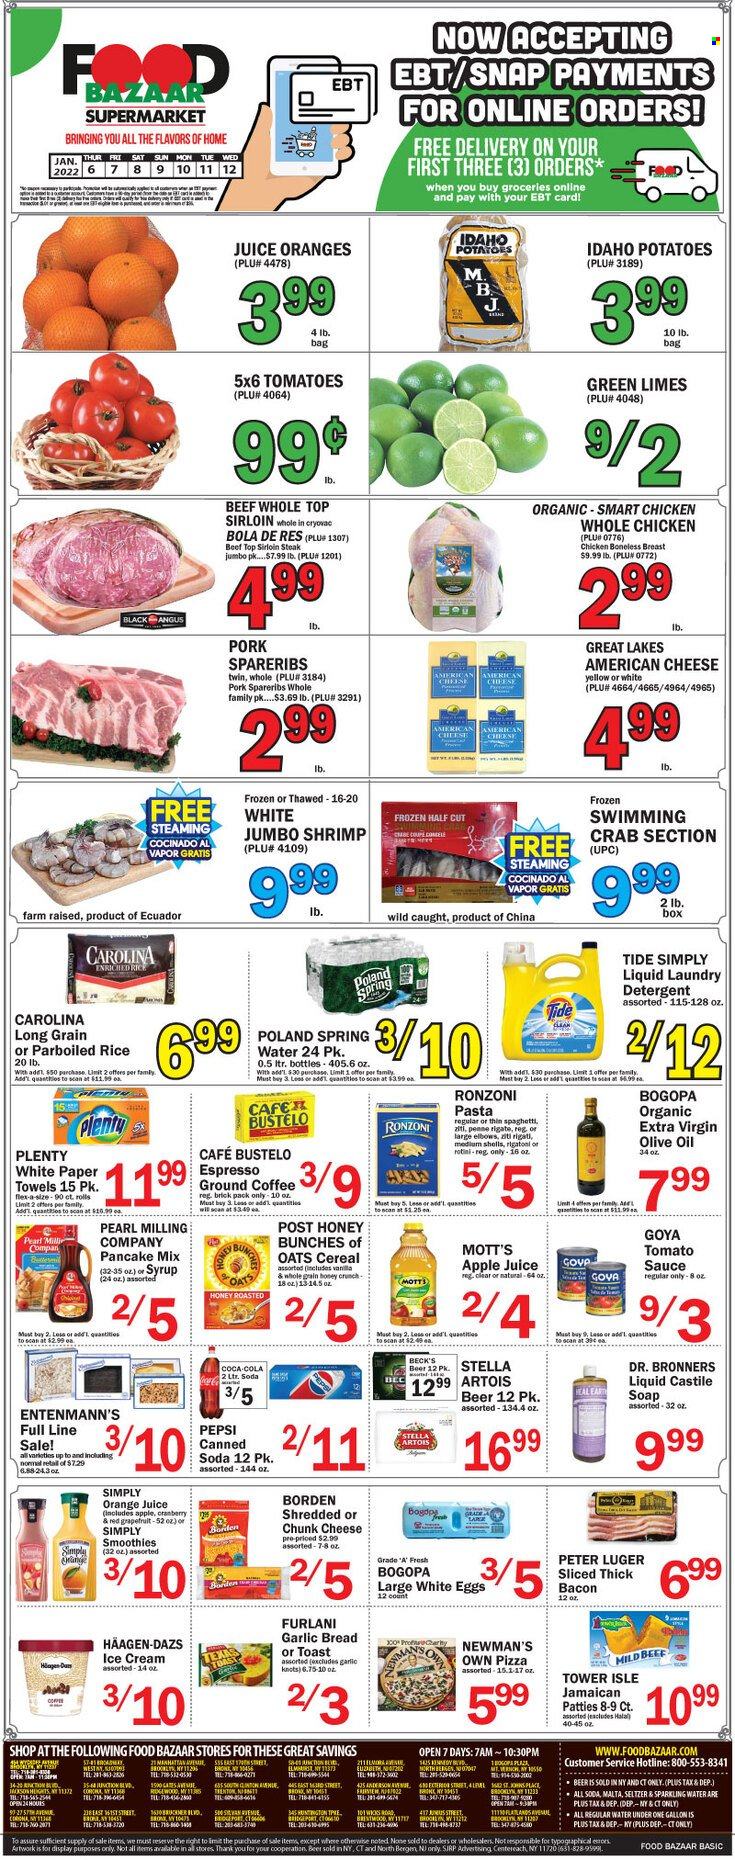 thumbnail - Food Bazaar Flyer - 01/06/2022 - 01/12/2022 - Sales products - bread, Entenmann's, potatoes, grapefruits, limes, Mott's, crab, shrimps, spaghetti, pizza, pasta, sauce, pancakes, american cheese, chunk cheese, eggs, ice cream, Häagen-Dazs, tomato sauce, Goya, cereals, parboiled rice, extra virgin olive oil, olive oil, oil, apple juice, Coca-Cola, Pepsi, orange juice, juice, smoothie, seltzer water, spring water, soda, sparkling water, coffee, ground coffee, beer, Beck's, whole chicken, beef sirloin, steak, sirloin steak, pork spare ribs. Page 1.